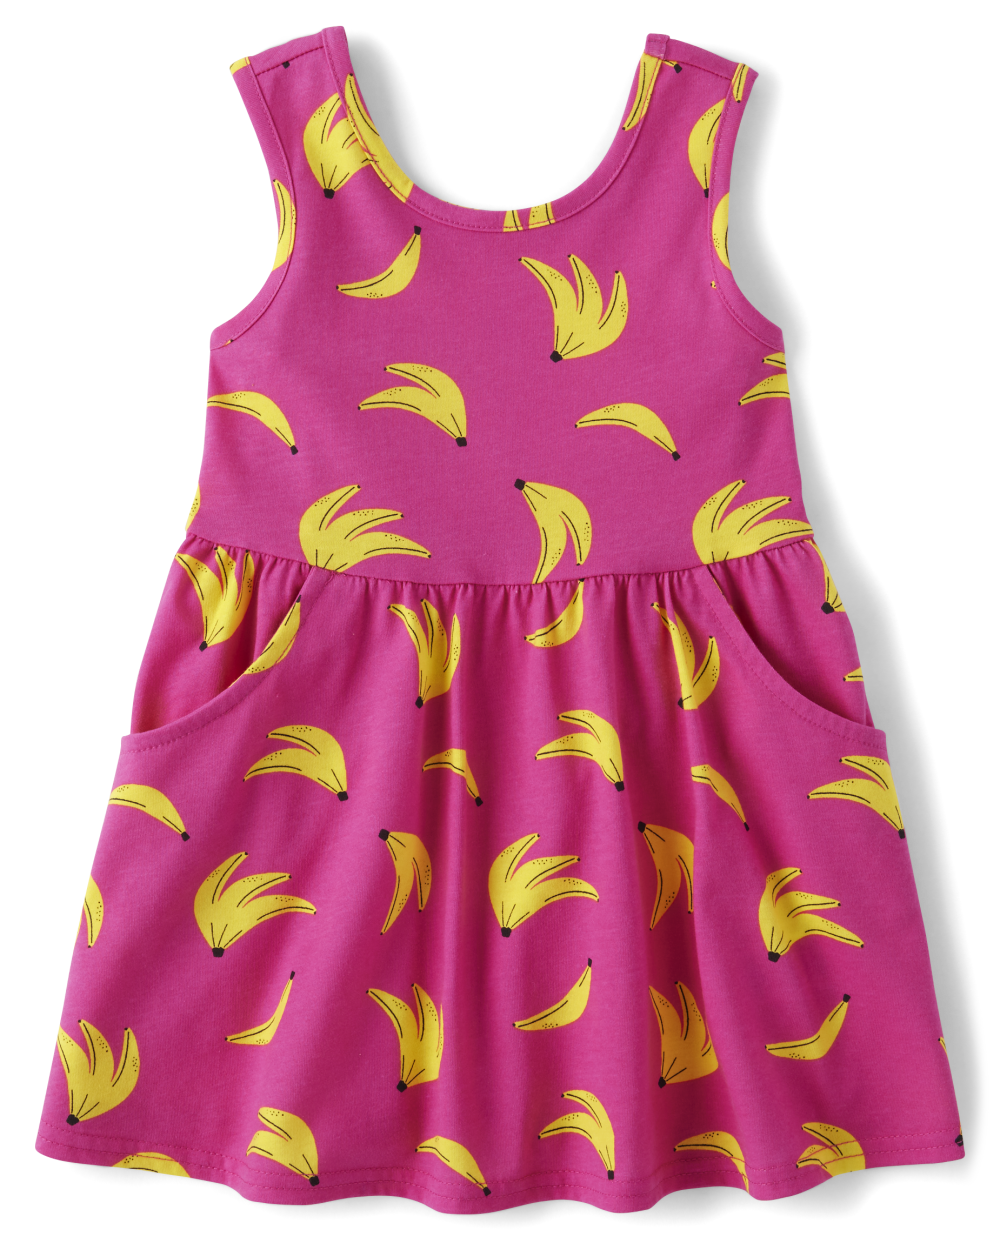 Toddler Baby Pocketed Sleeveless Tank Above the Knee General Print Scoop Neck Dress